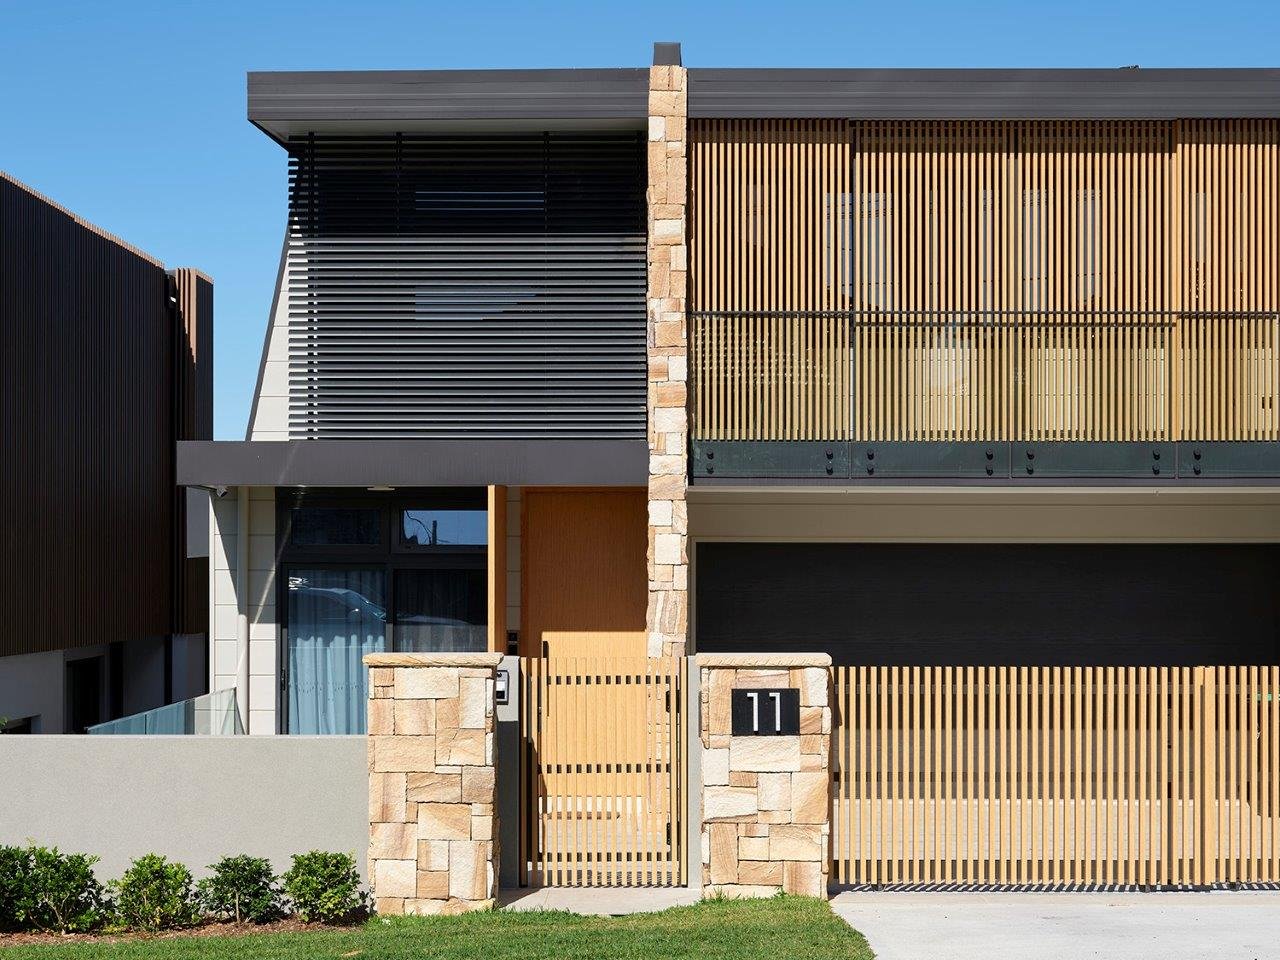  Private Residence - NSW  Ever Art Wood® battens - Kabebari 12x100 and 30x50 in Biera Oku 